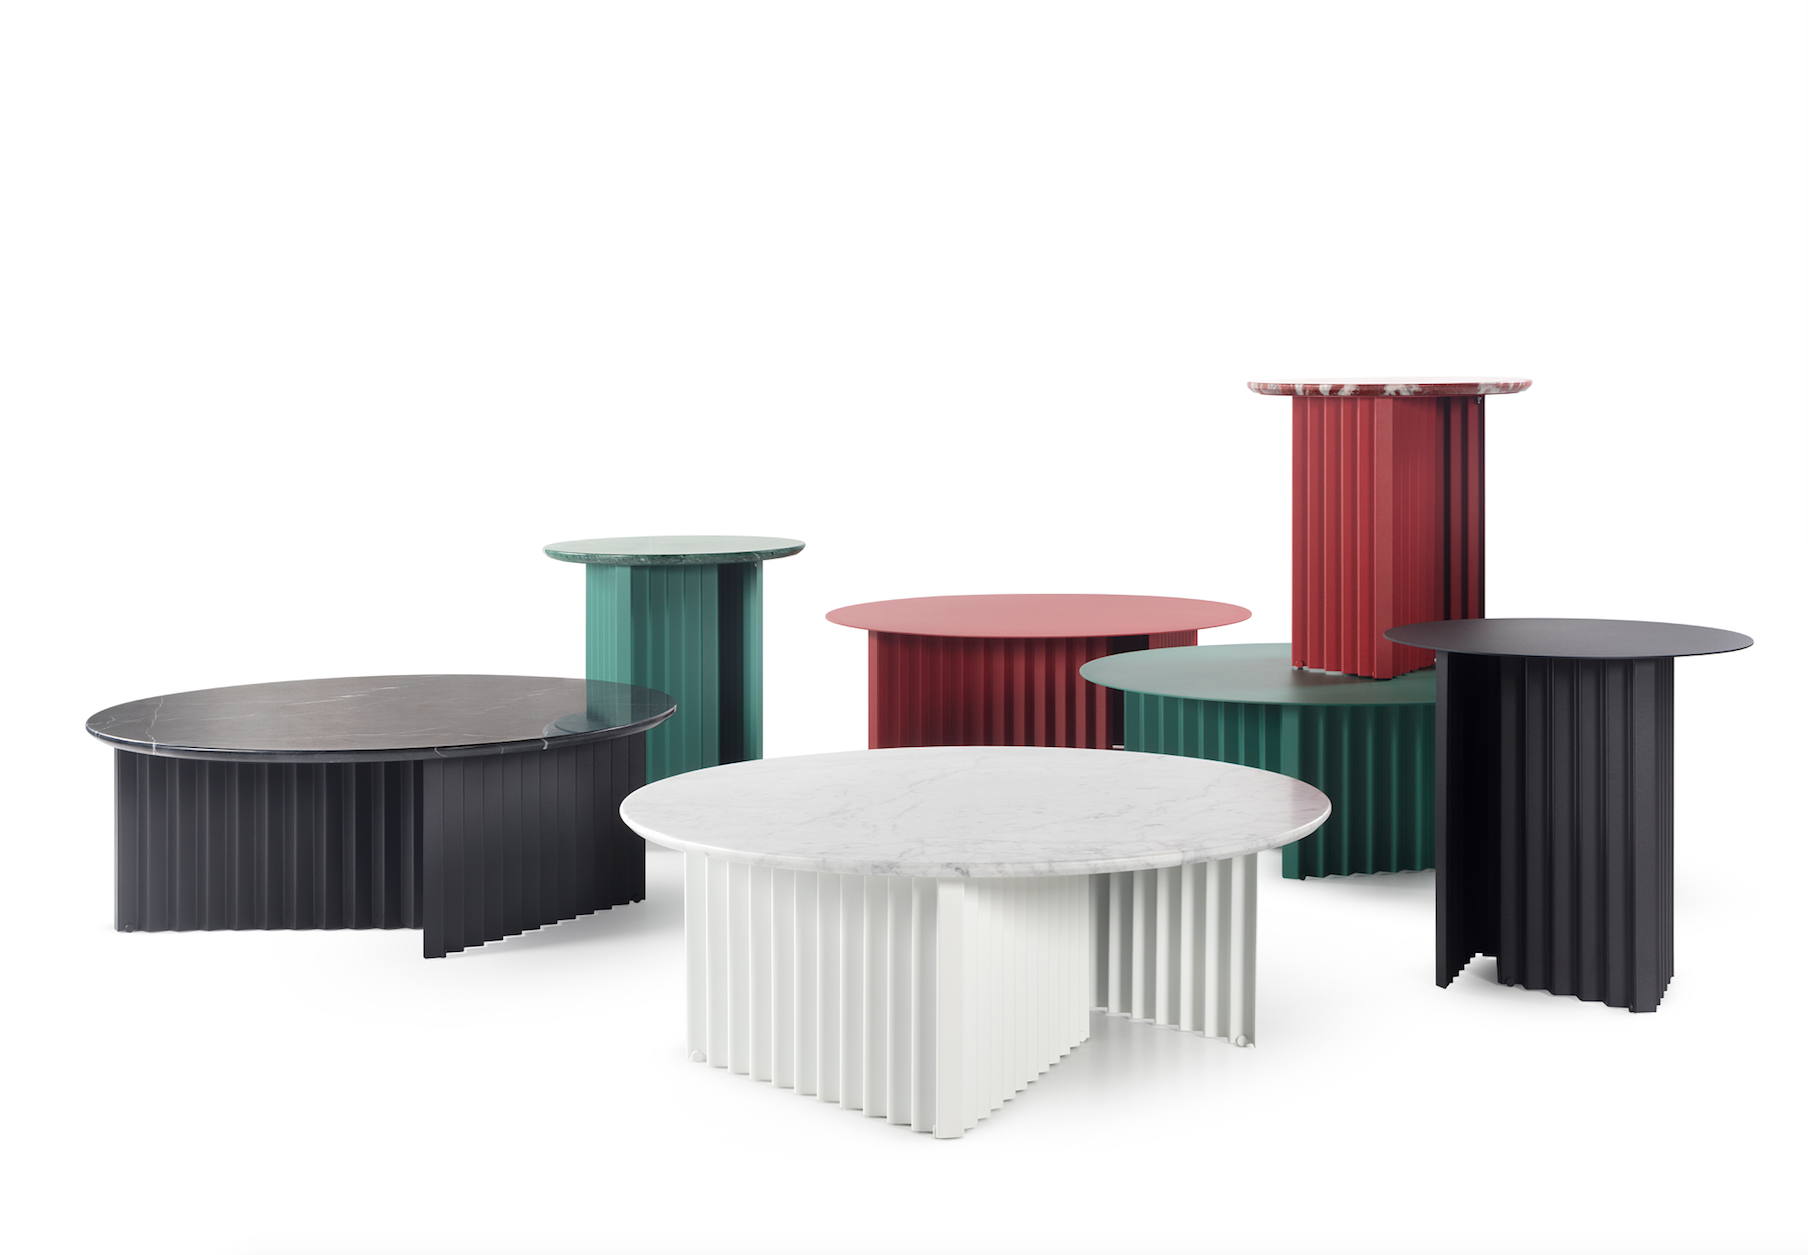 Plec table by RS Barcelona